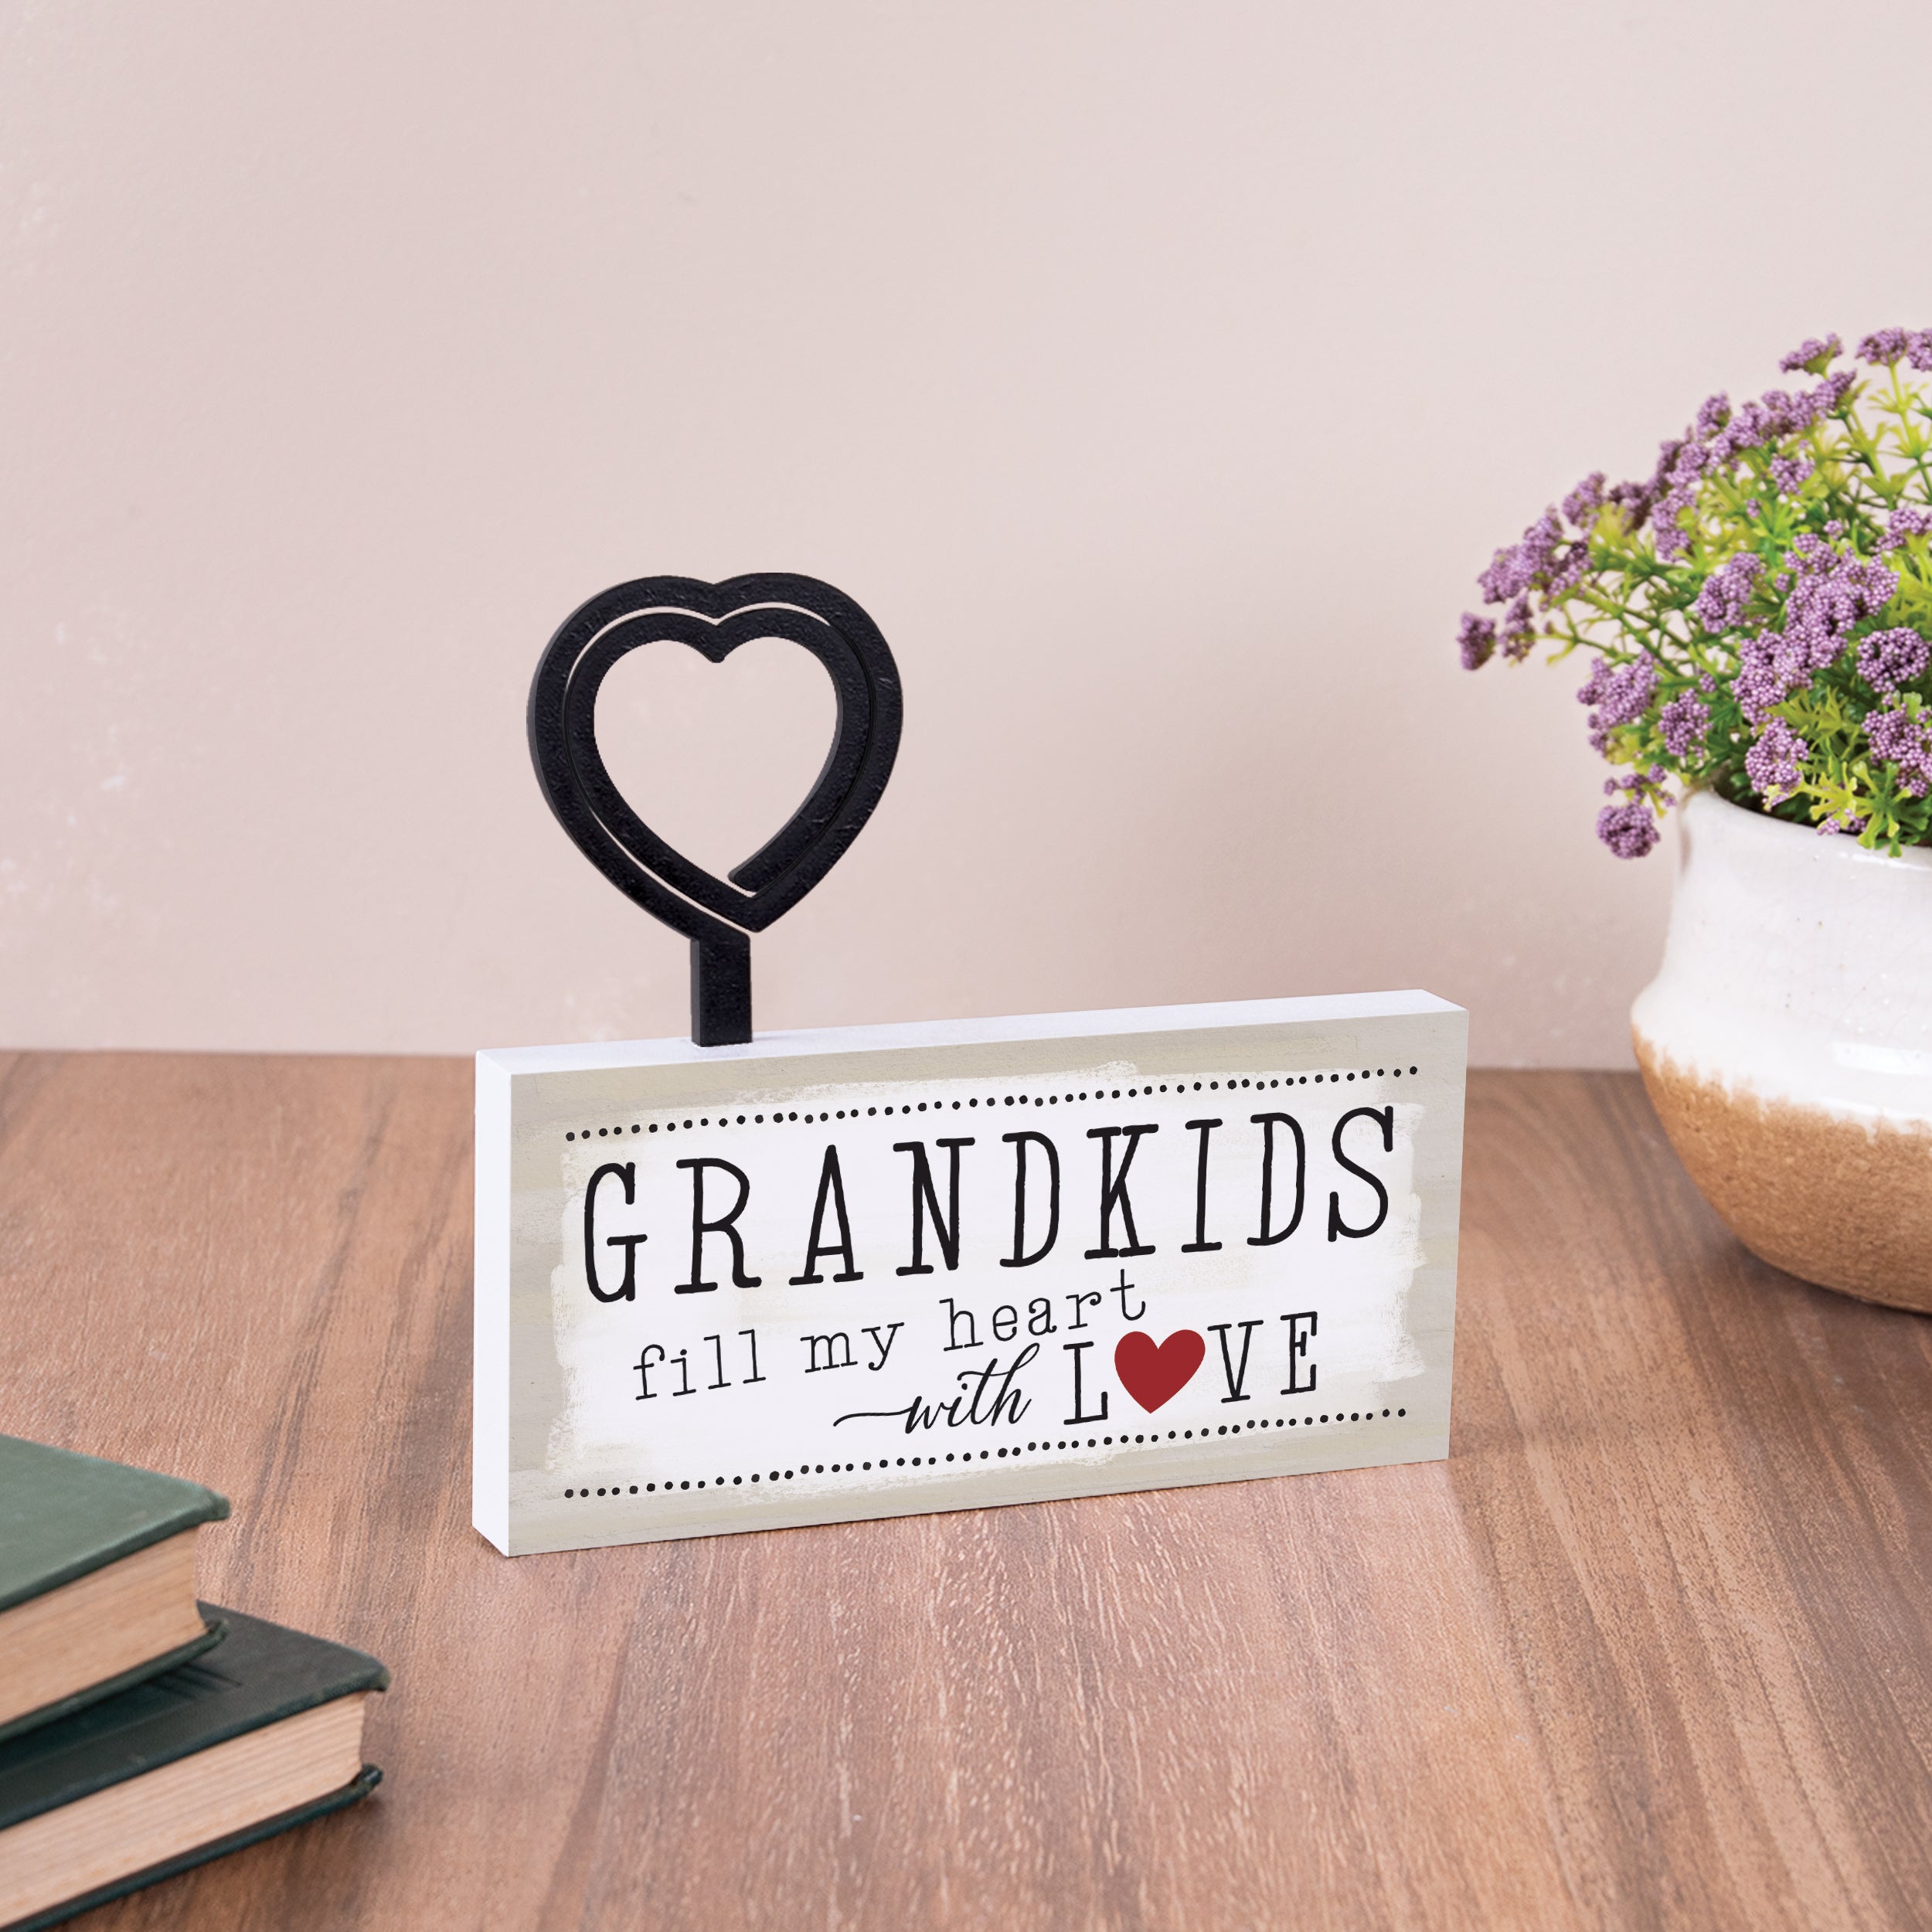 Grandkids Fill My Heart With Love Photo Frame